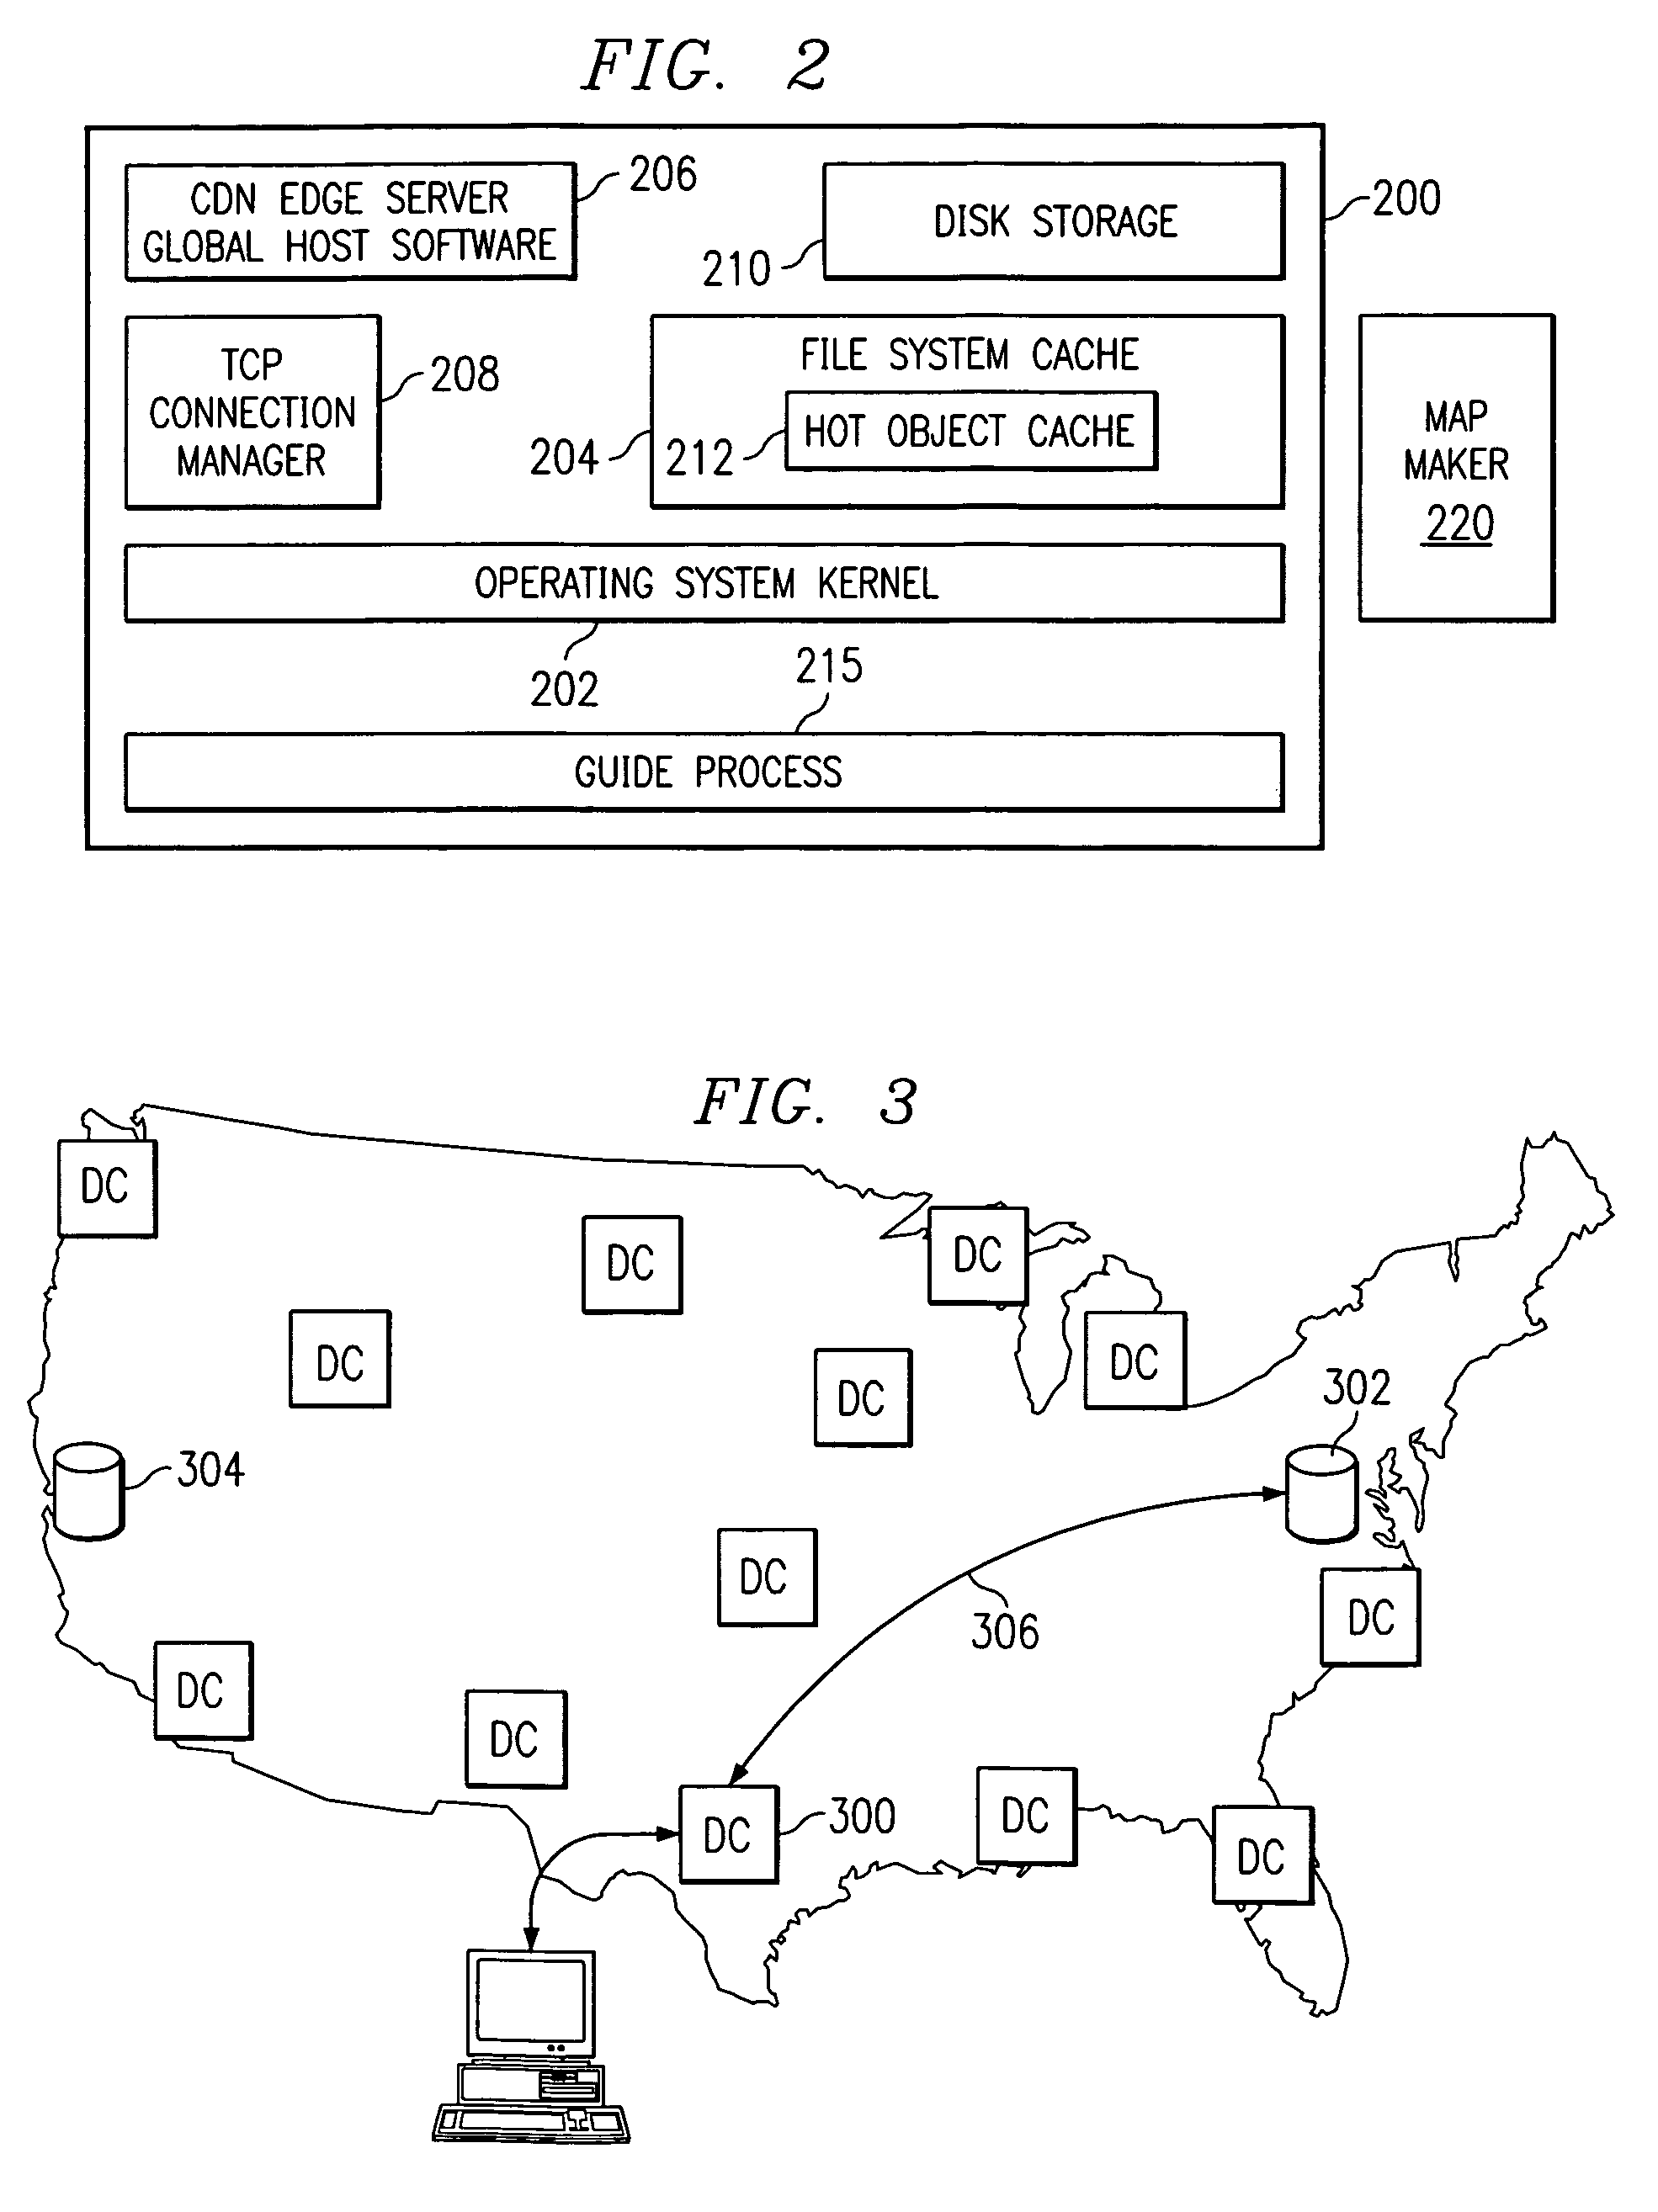 Optimal route selection in a content delivery network